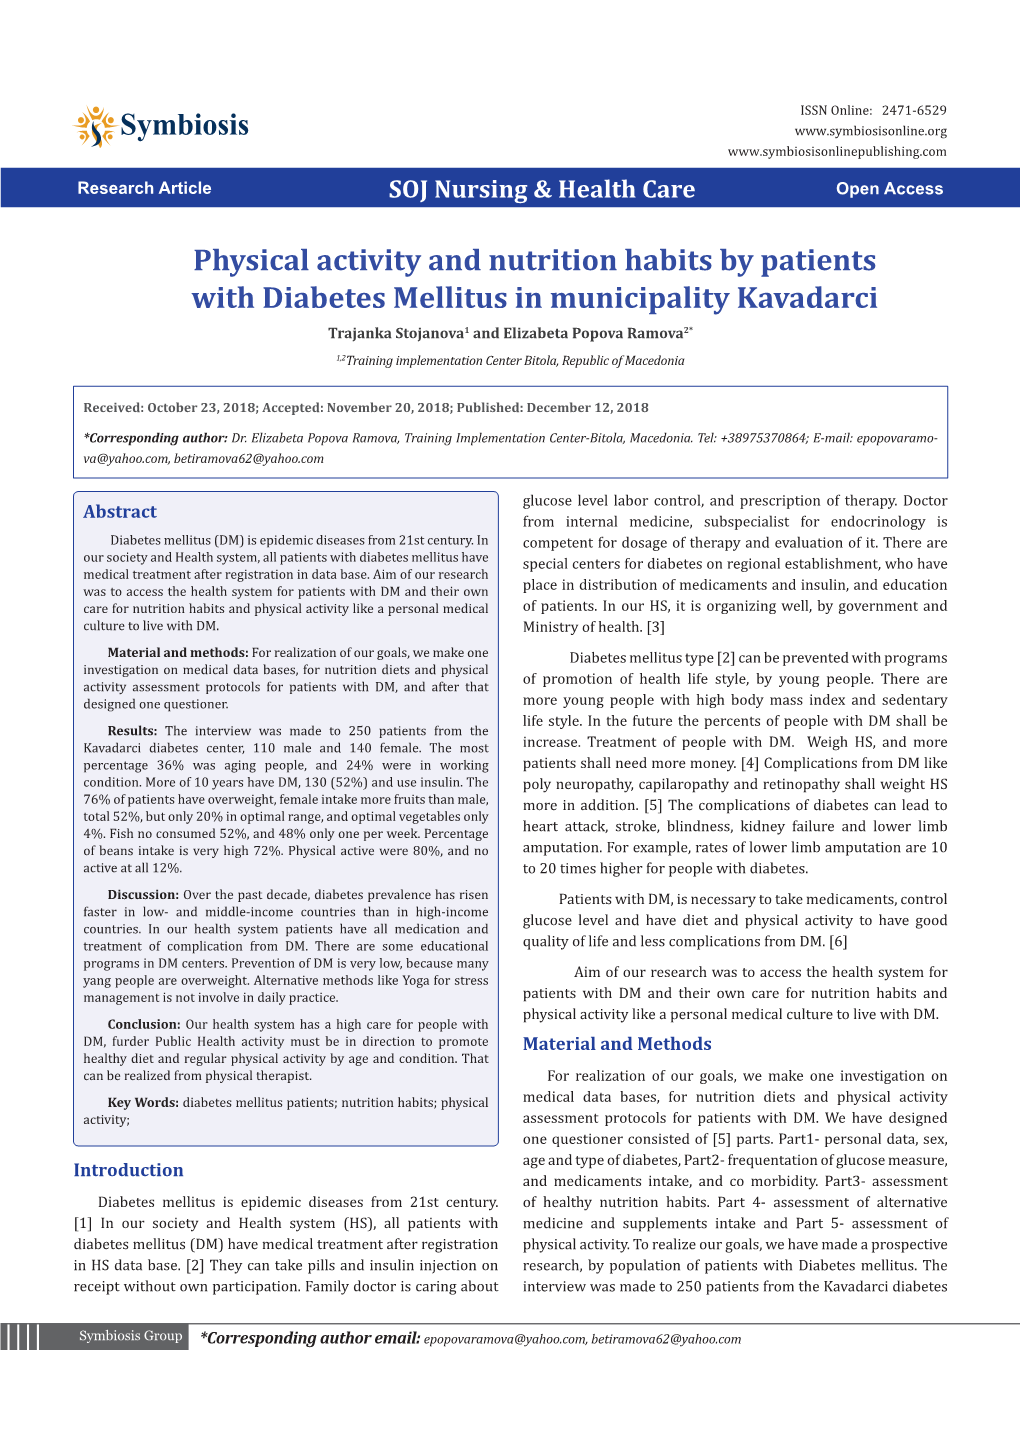 Physical Activity and Nutrition Habits by Patients with Diabetes Mellitus In